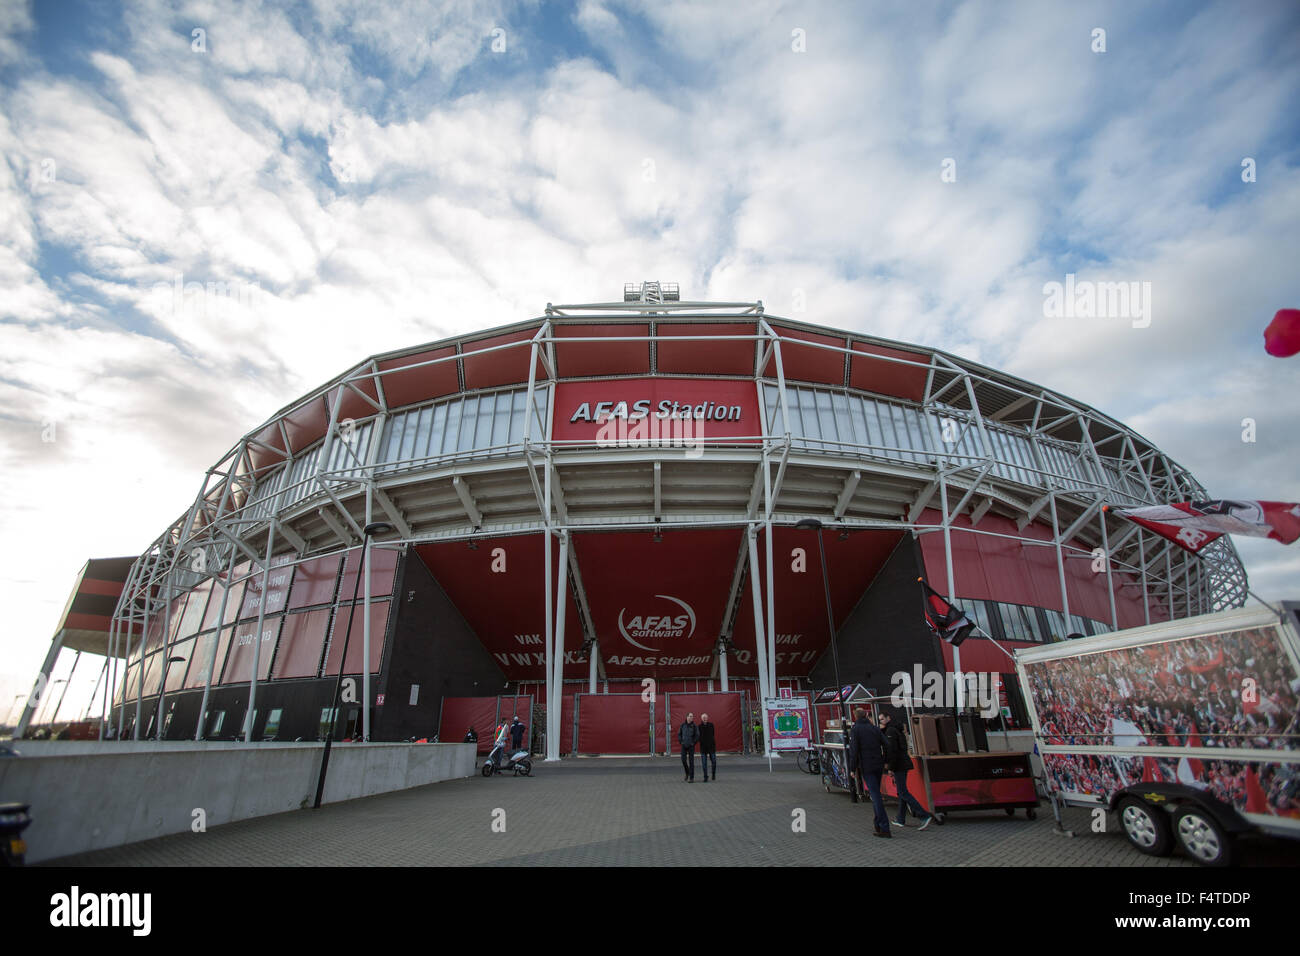 The AFAS Stadion in Alkmaar, the Netherlands, 22 October 2015, prior to the UEFA Europa League Group L soccer match between AZ Alkmaar and FC Augsburg. Photo: Maja Hiti/dpa Stock Photo